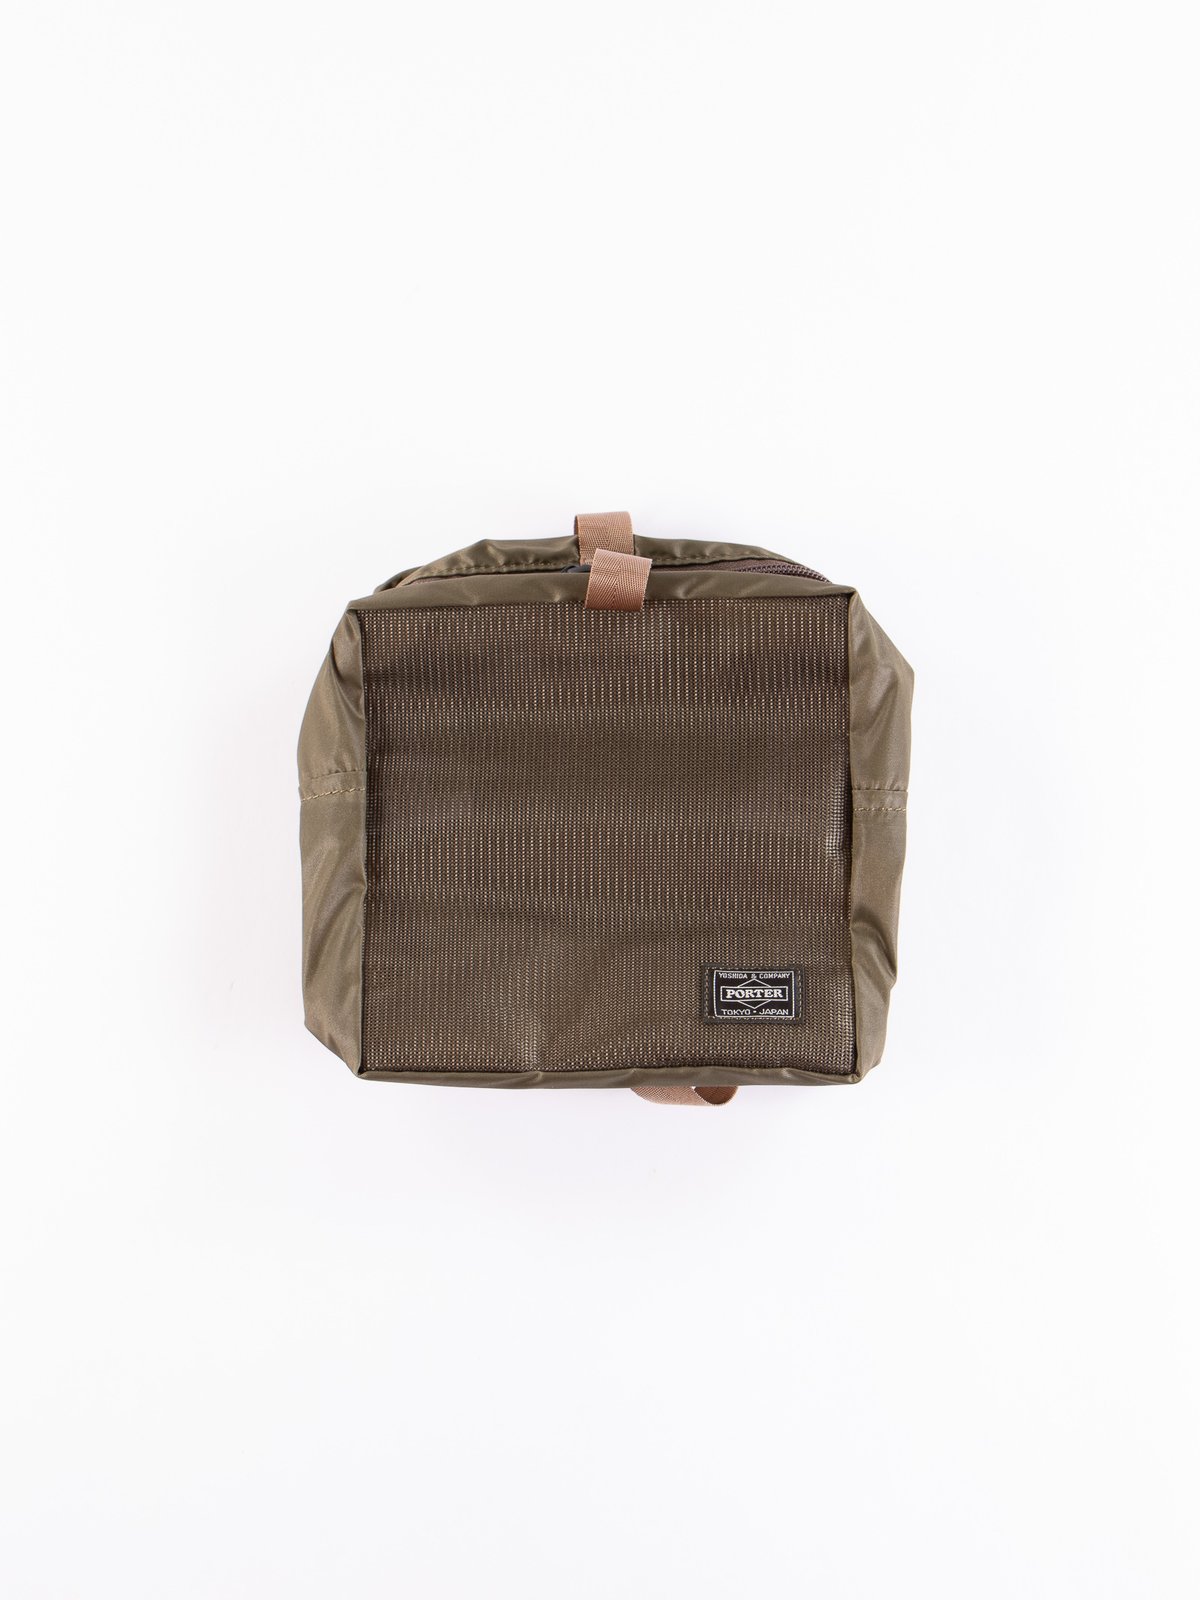 Olive Drab Snack Pack 09807 Pouch Small - Image 1